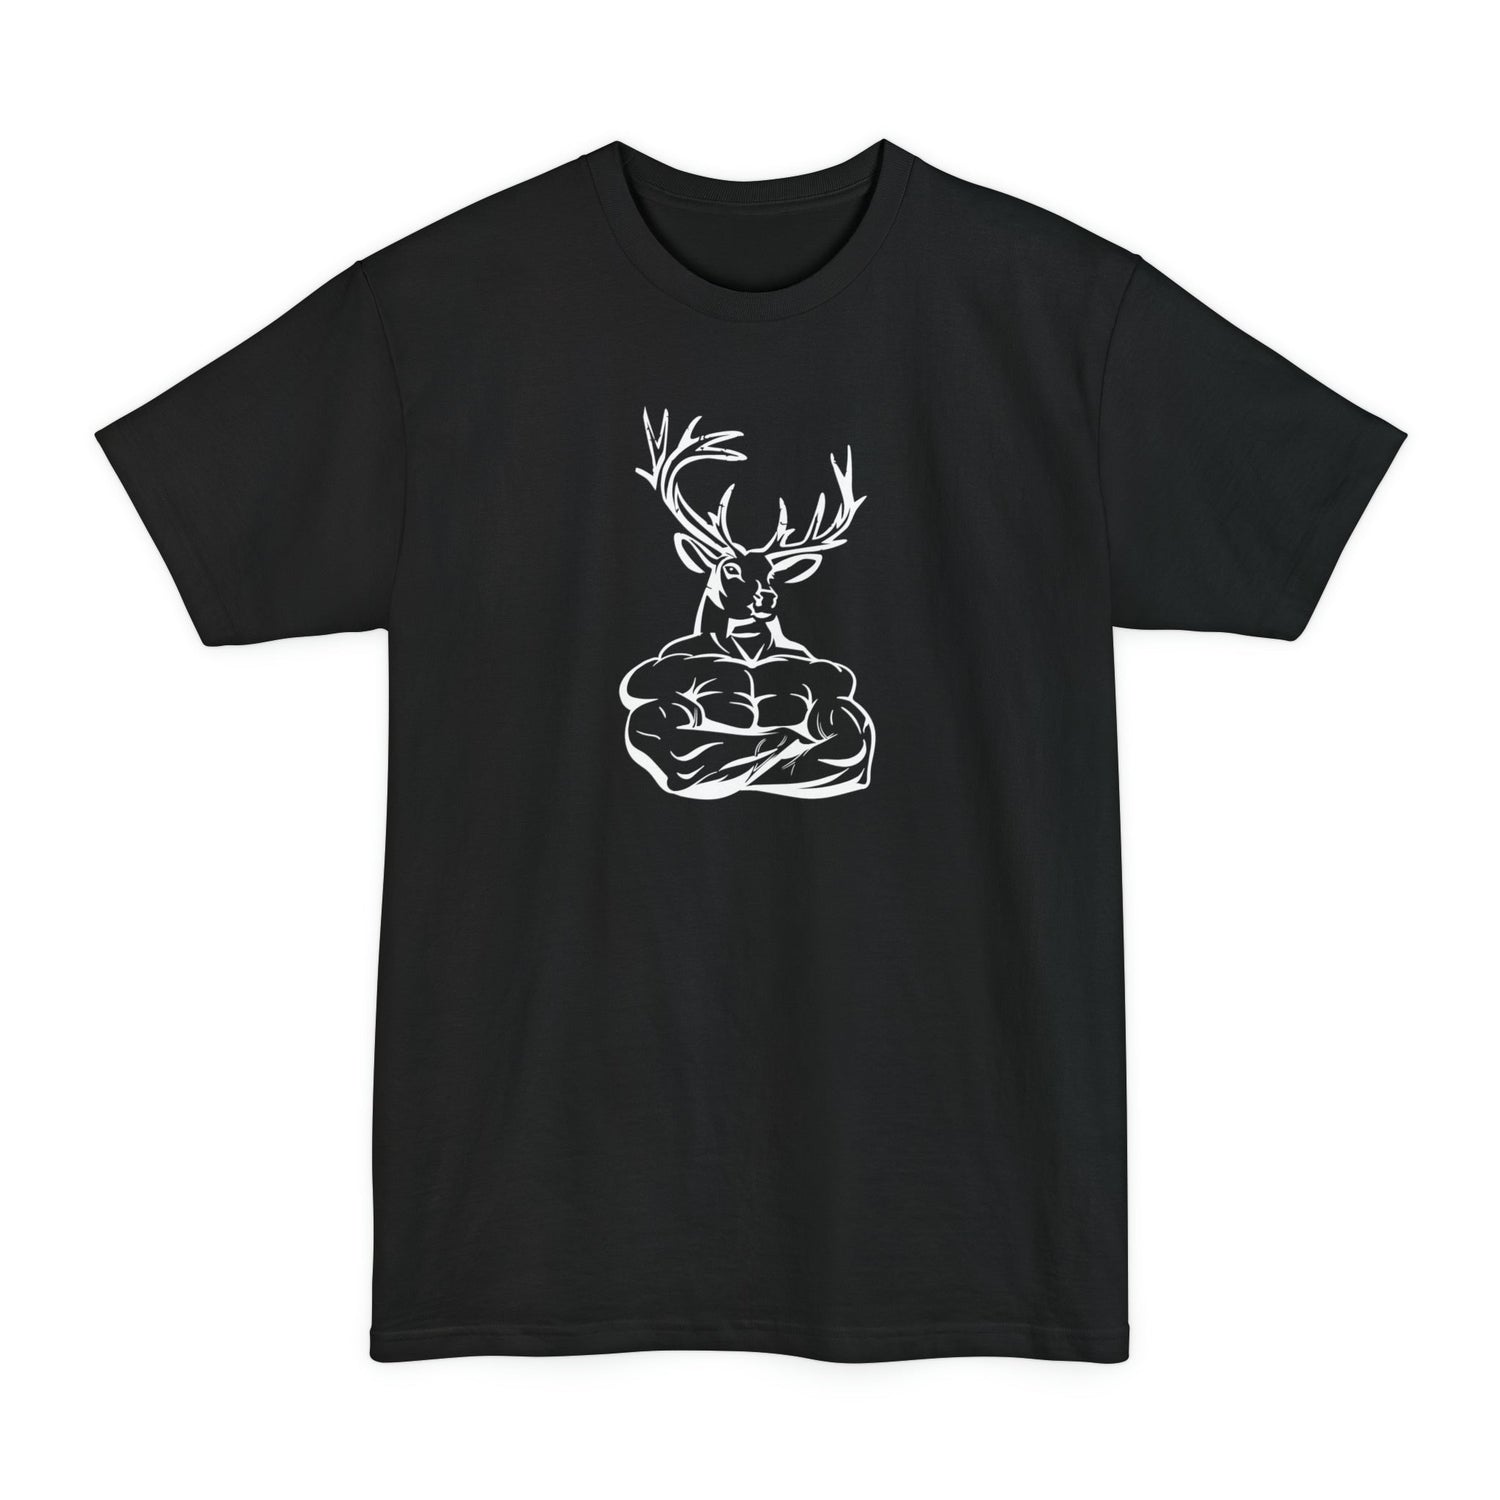 Big and tall deer hunting t-shirt, color black, back design placement